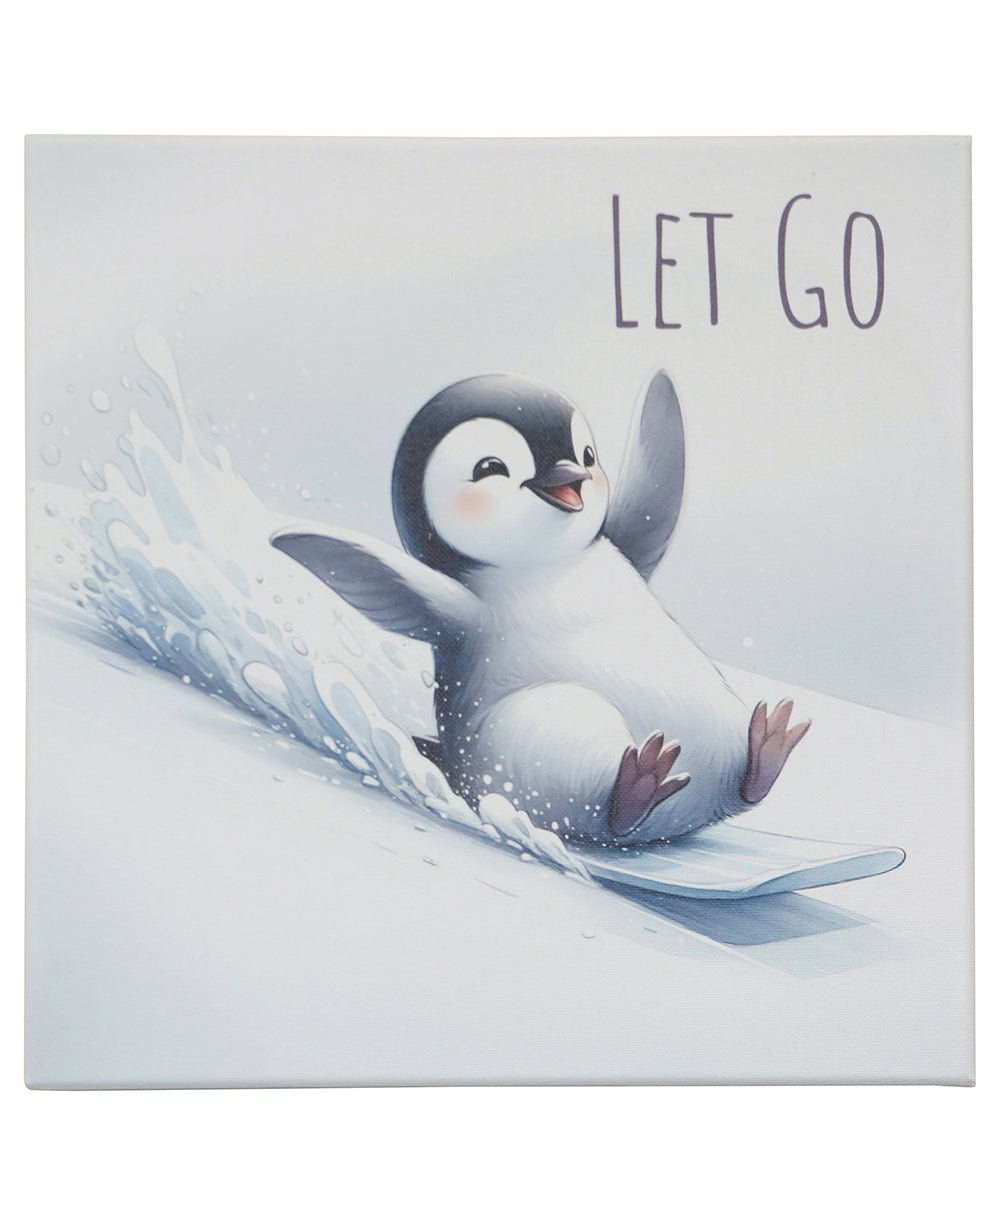 Let Go Happy Penguin Inspirational Canvas Print Wall Hanging - Posters, Prints, & Visual Artwork